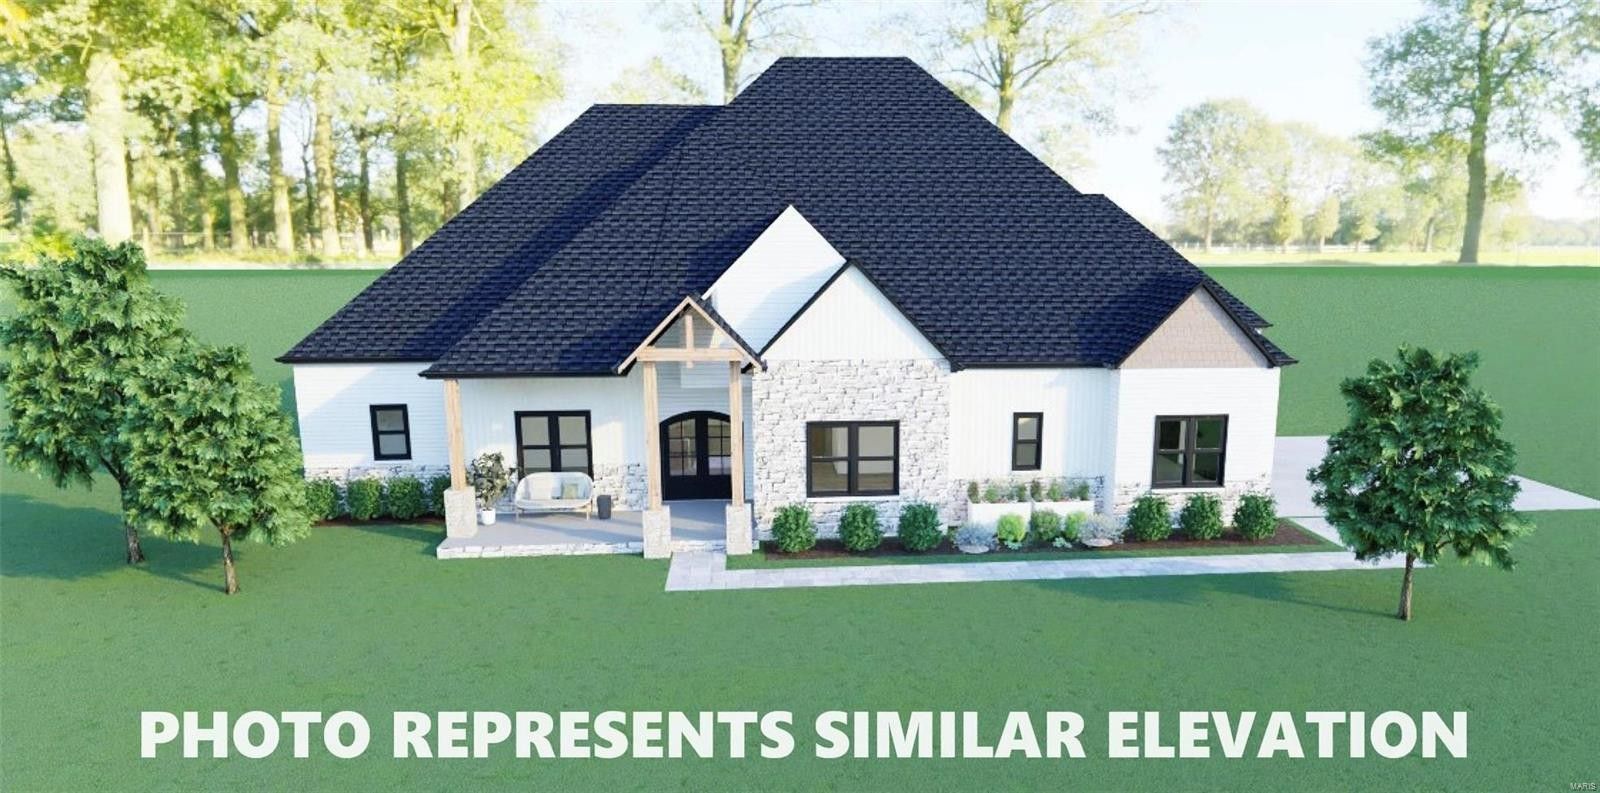 0 To Be Built  70 Eagles Watch Drive. Silex, MO 63377